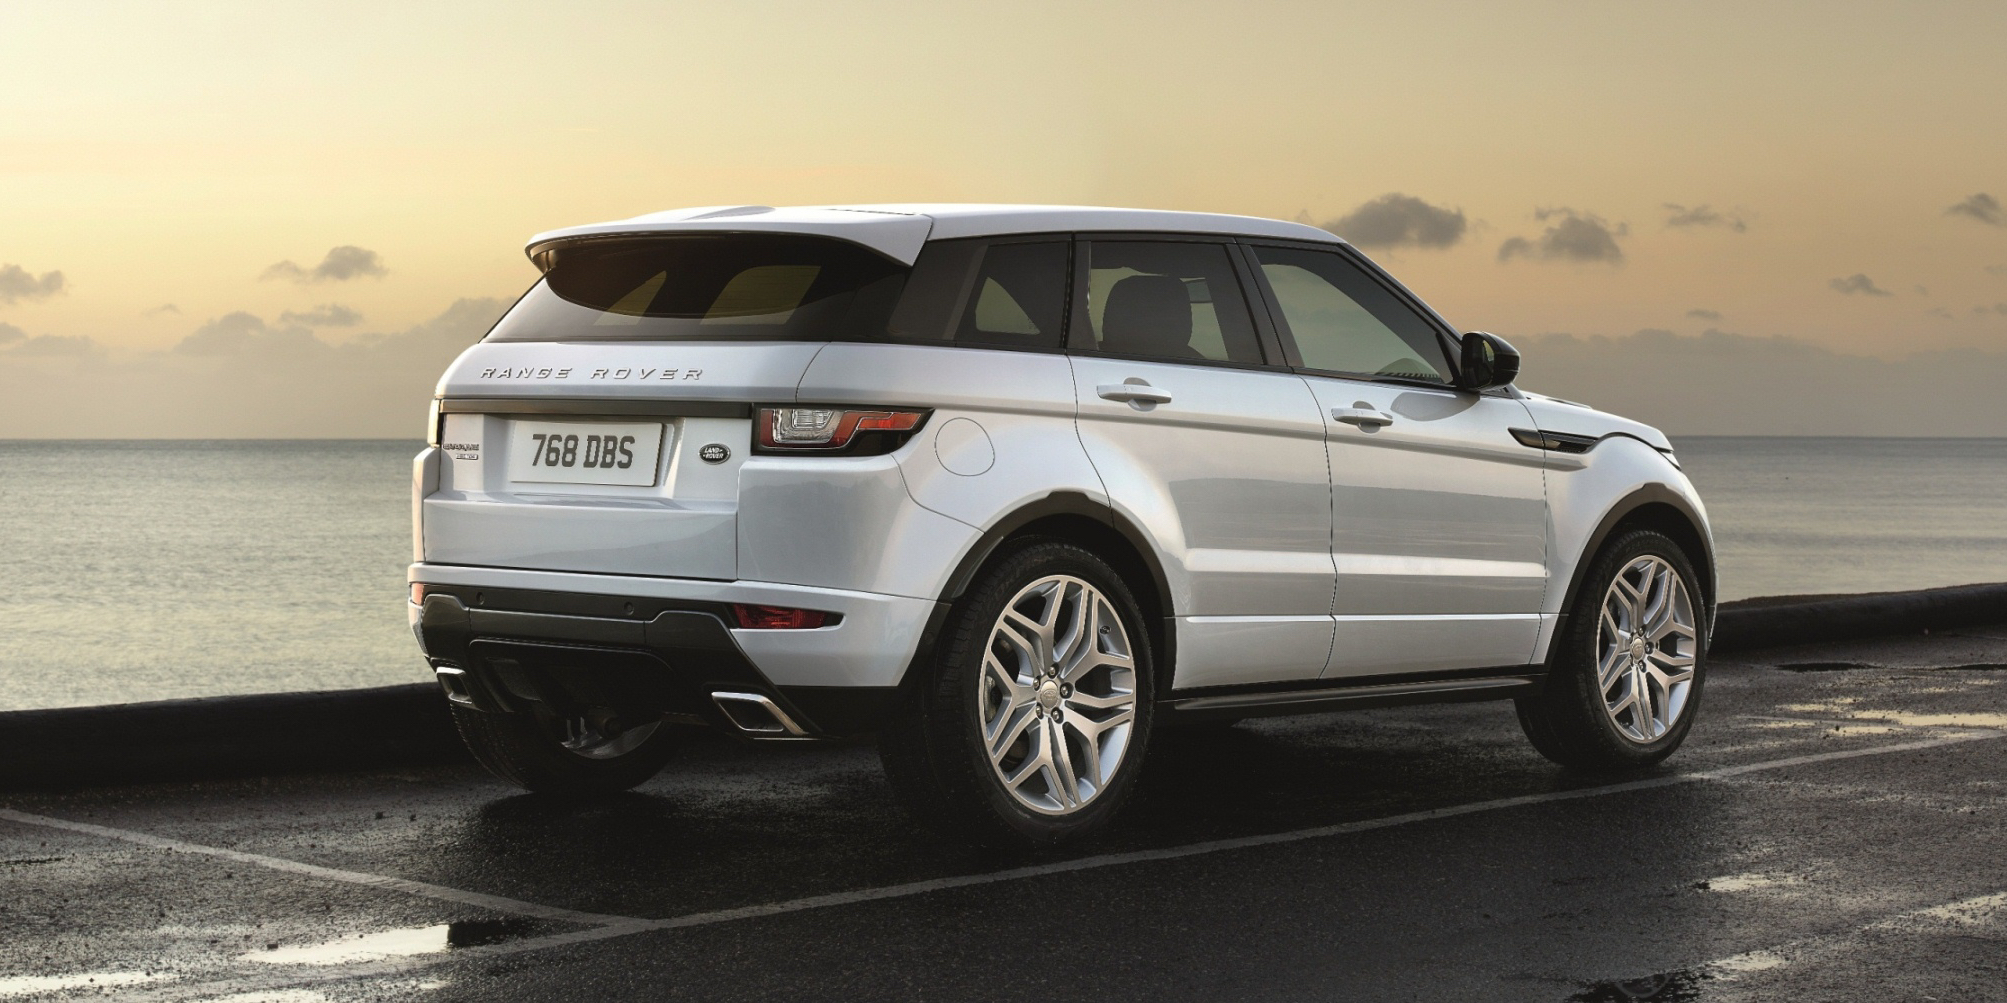 2016 Range Rover Evoque pricing and specifications - Photos (1 of 9)